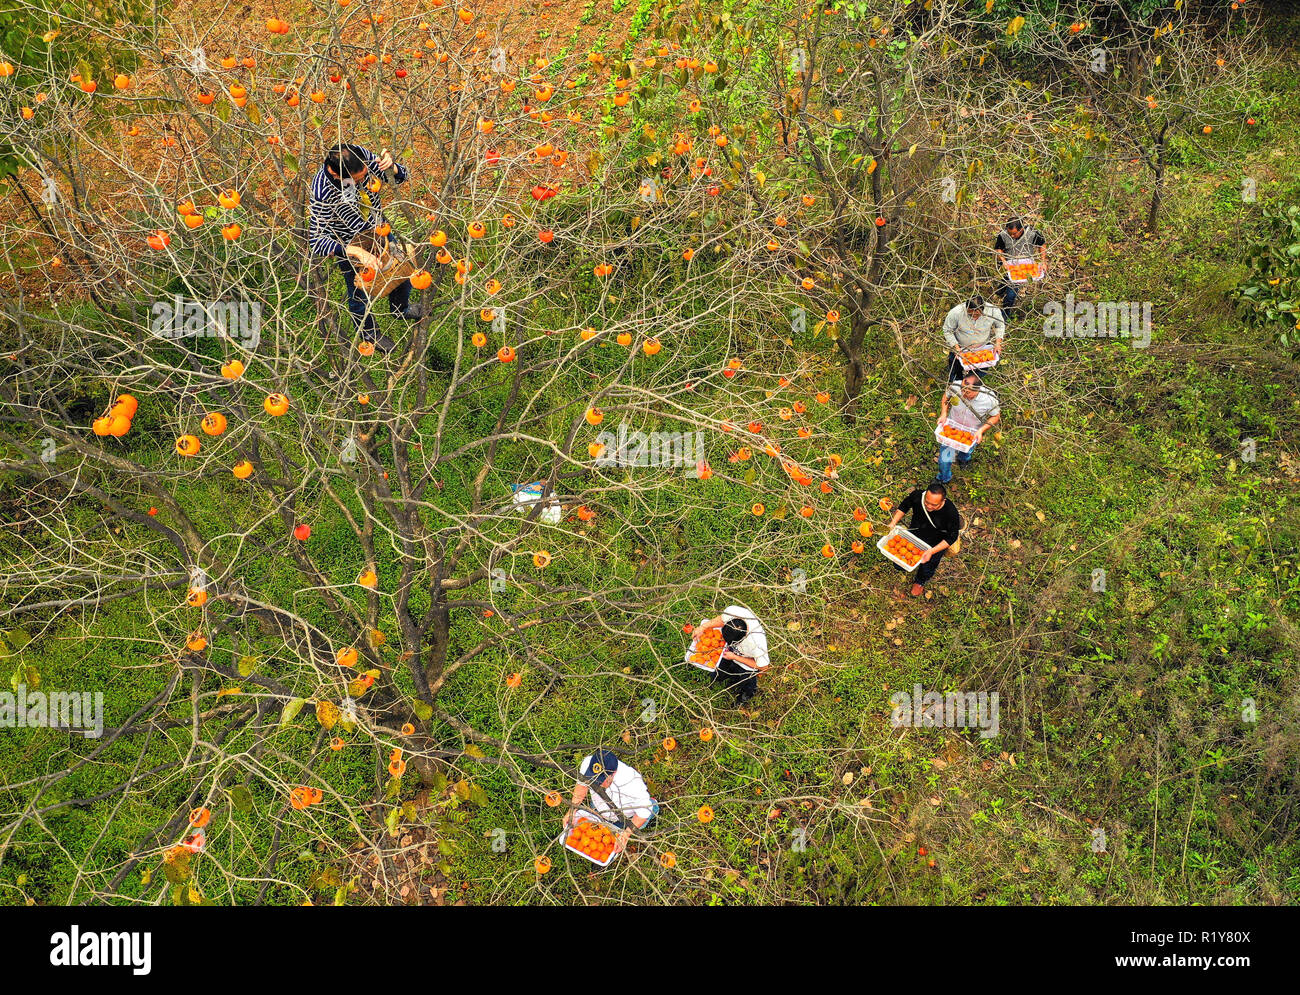 Yuping, China's Guizhou Province. 3rd Oct, 2018. Aerial photo shows villagers carring newly-harvested persimmons in Yutang Village of Yuping Dong Autonomous County, southwest China's Guizhou Province, Oct. 3, 2018. Local villagers have been busy harvesting and processing persimmons lately. Credit: Hu Panxue/Xinhua/Alamy Live News Stock Photo